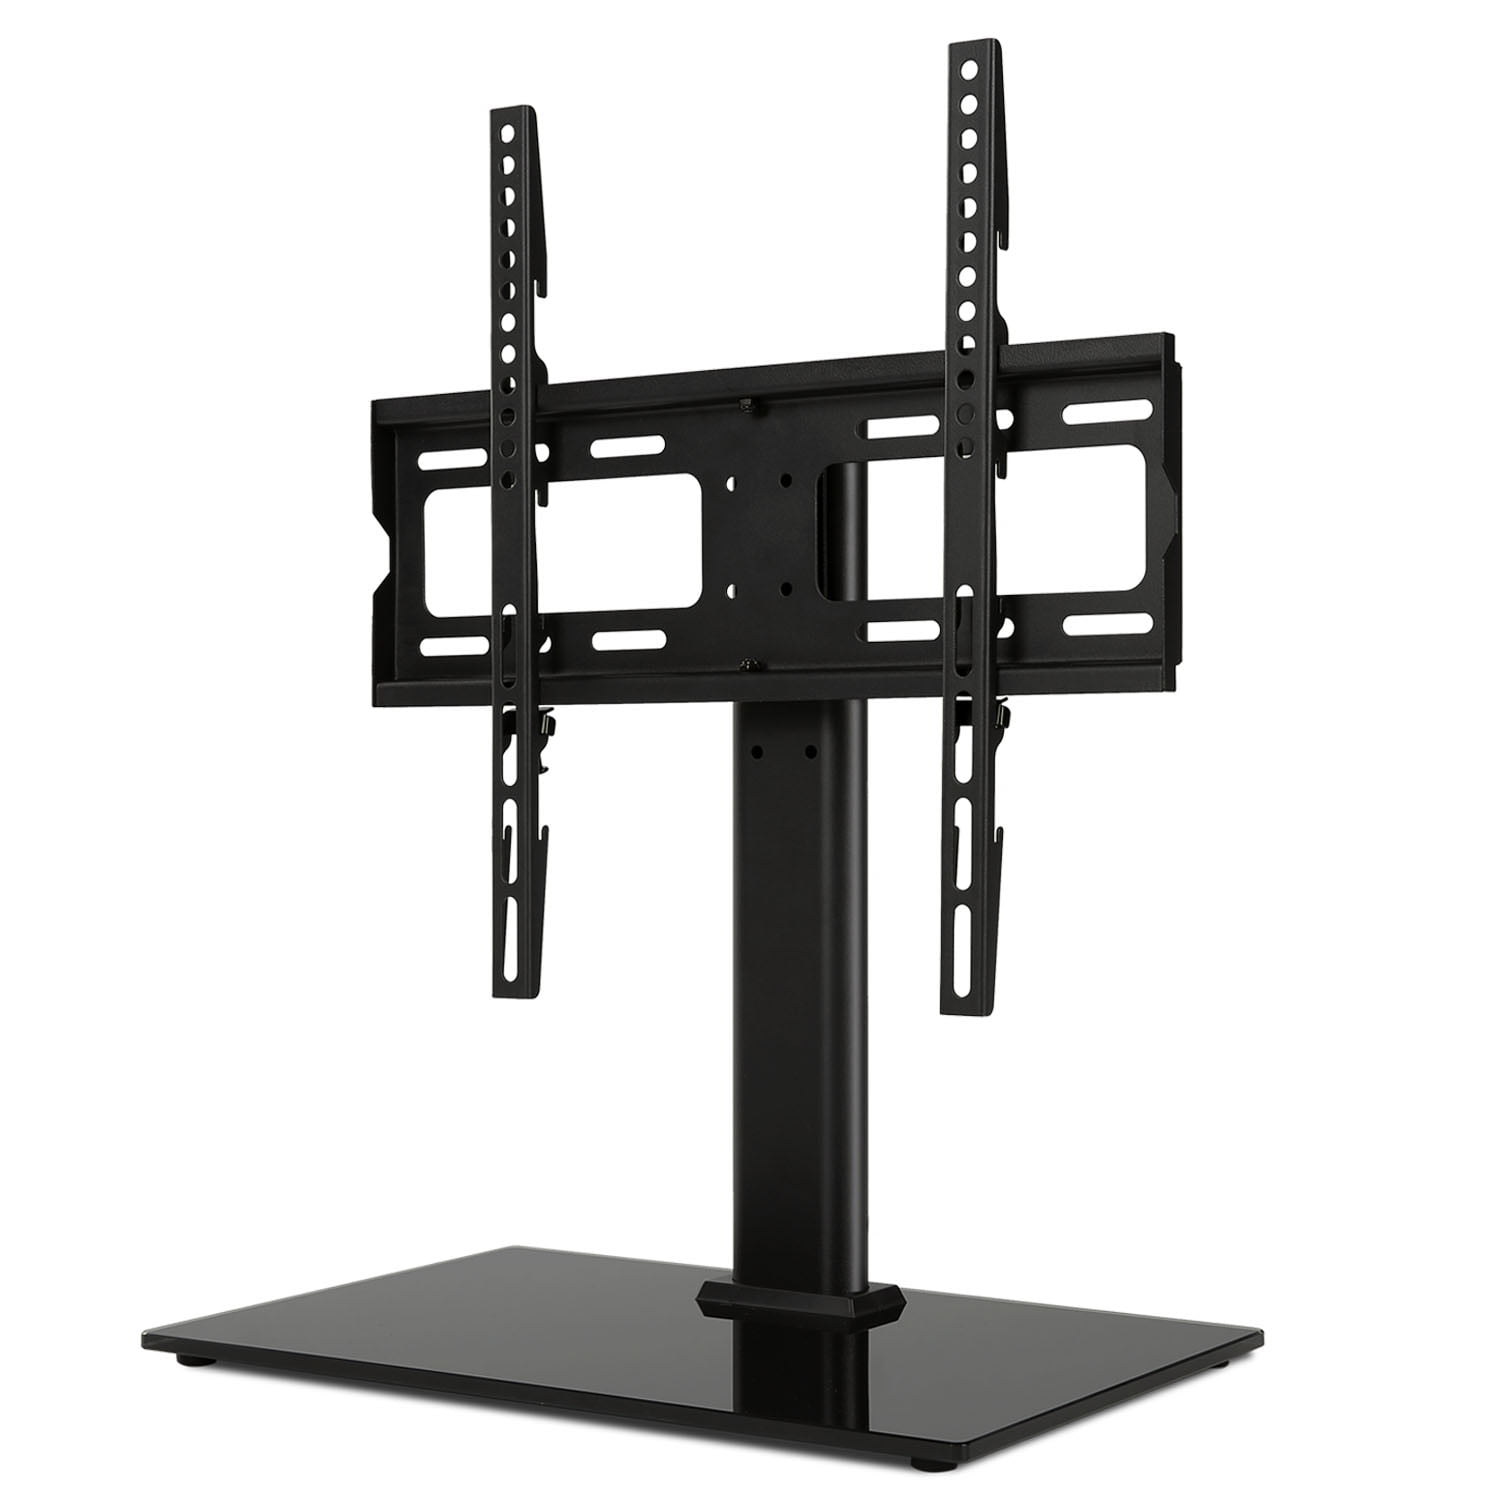 Details about   Table Top Flat Panel TV Stand Universal fit for TVs up to 42" 66 lbs Black 